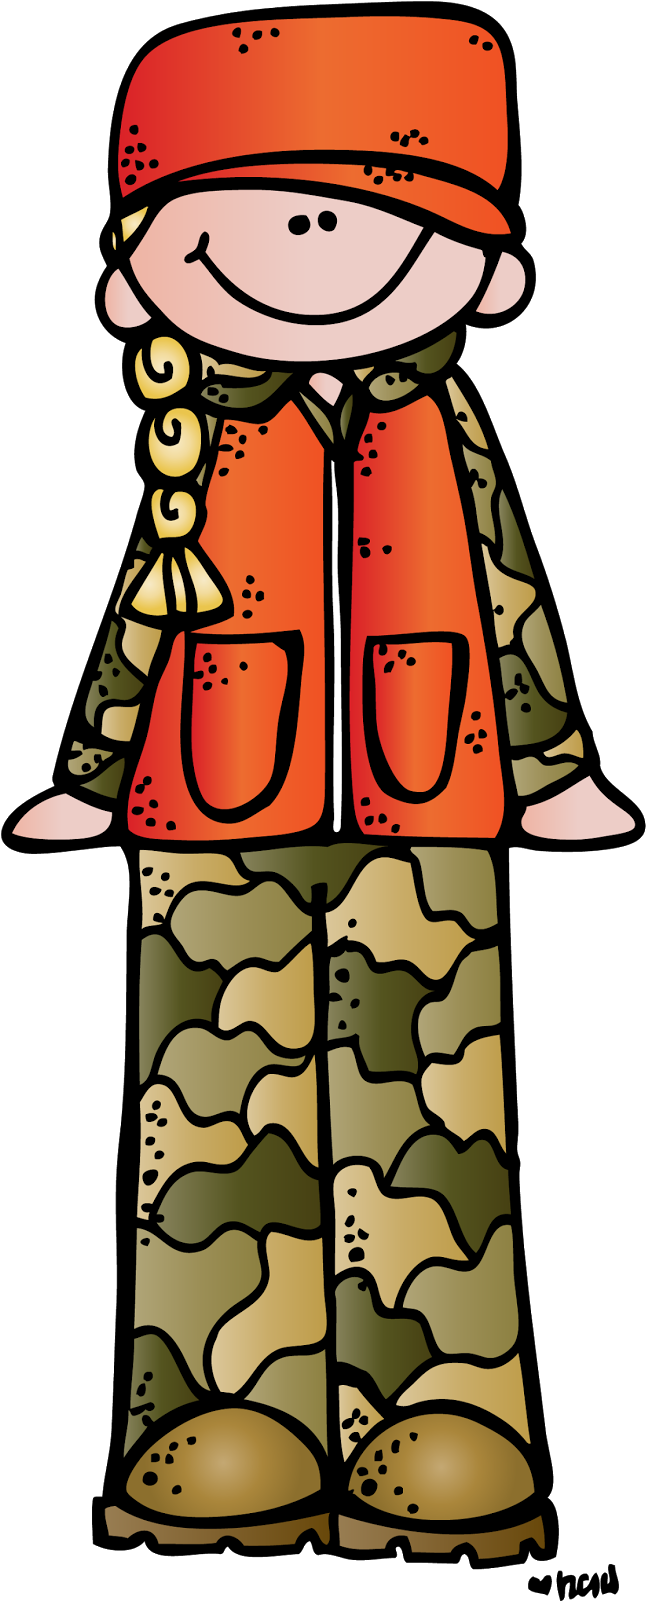 Hunting 0 Images About Clipart On Clip Art Ninja Turtles - Melonheadz Hunter (659x1600)